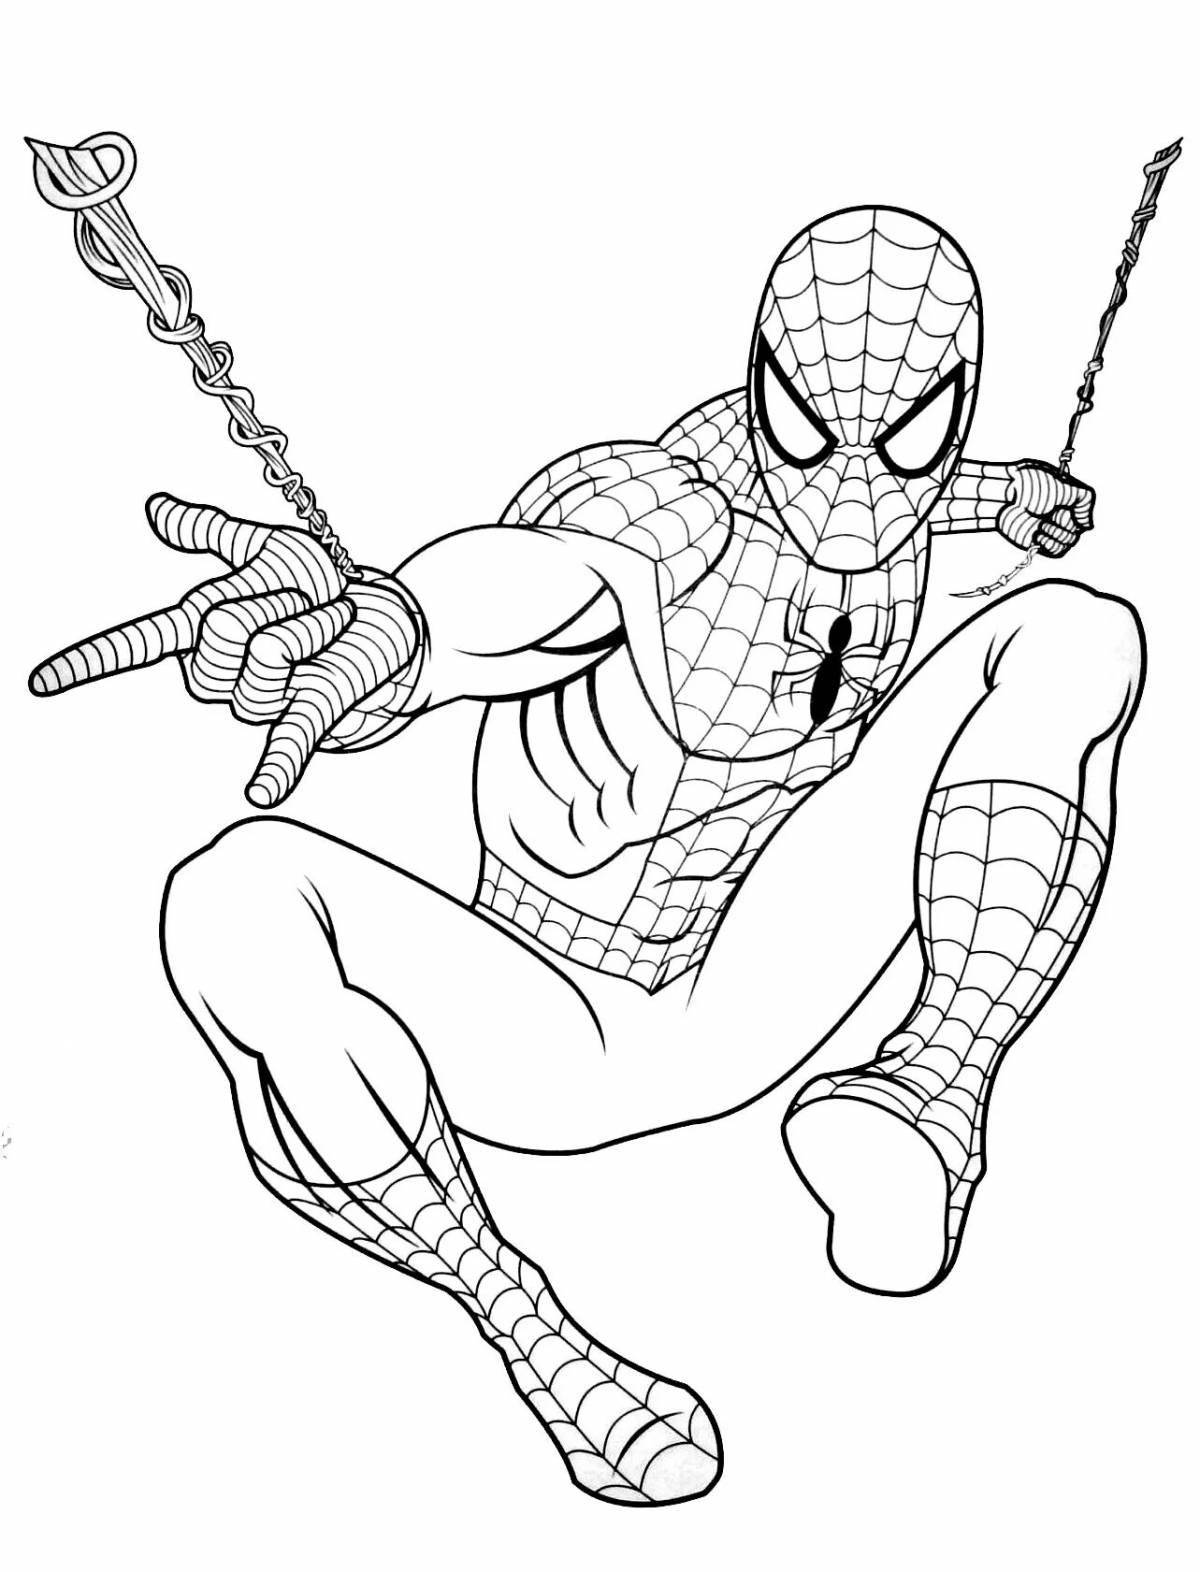 Spider-Man funny coloring book